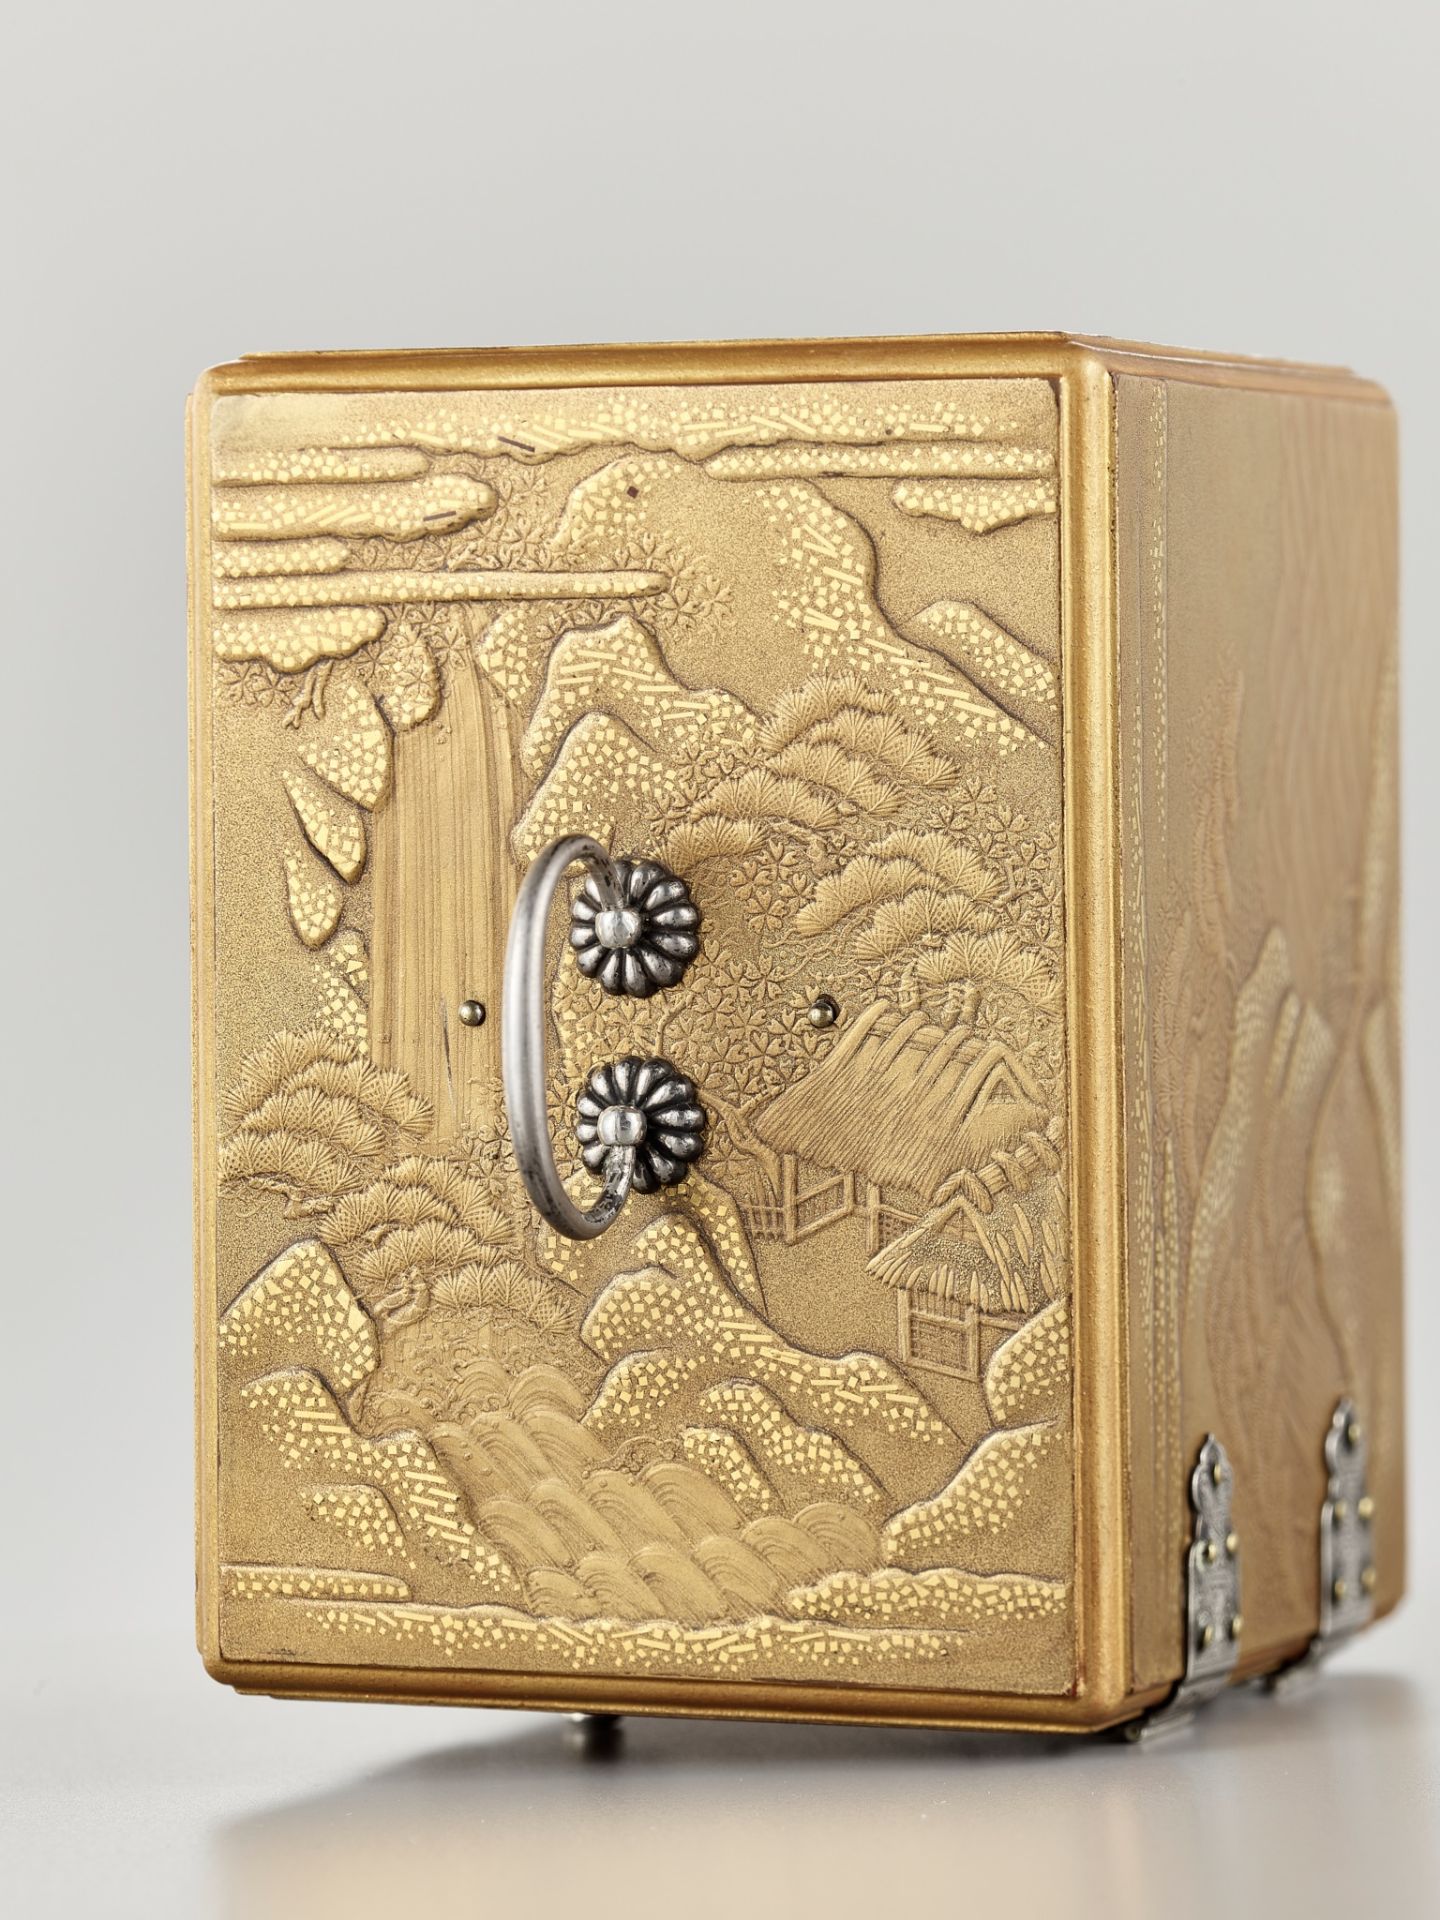 A SUPERB LACQUER MINIATURE KODANSU (CABINET) DEPICTING THE NUNOBIKI FALLS WITH STAND - Image 4 of 12